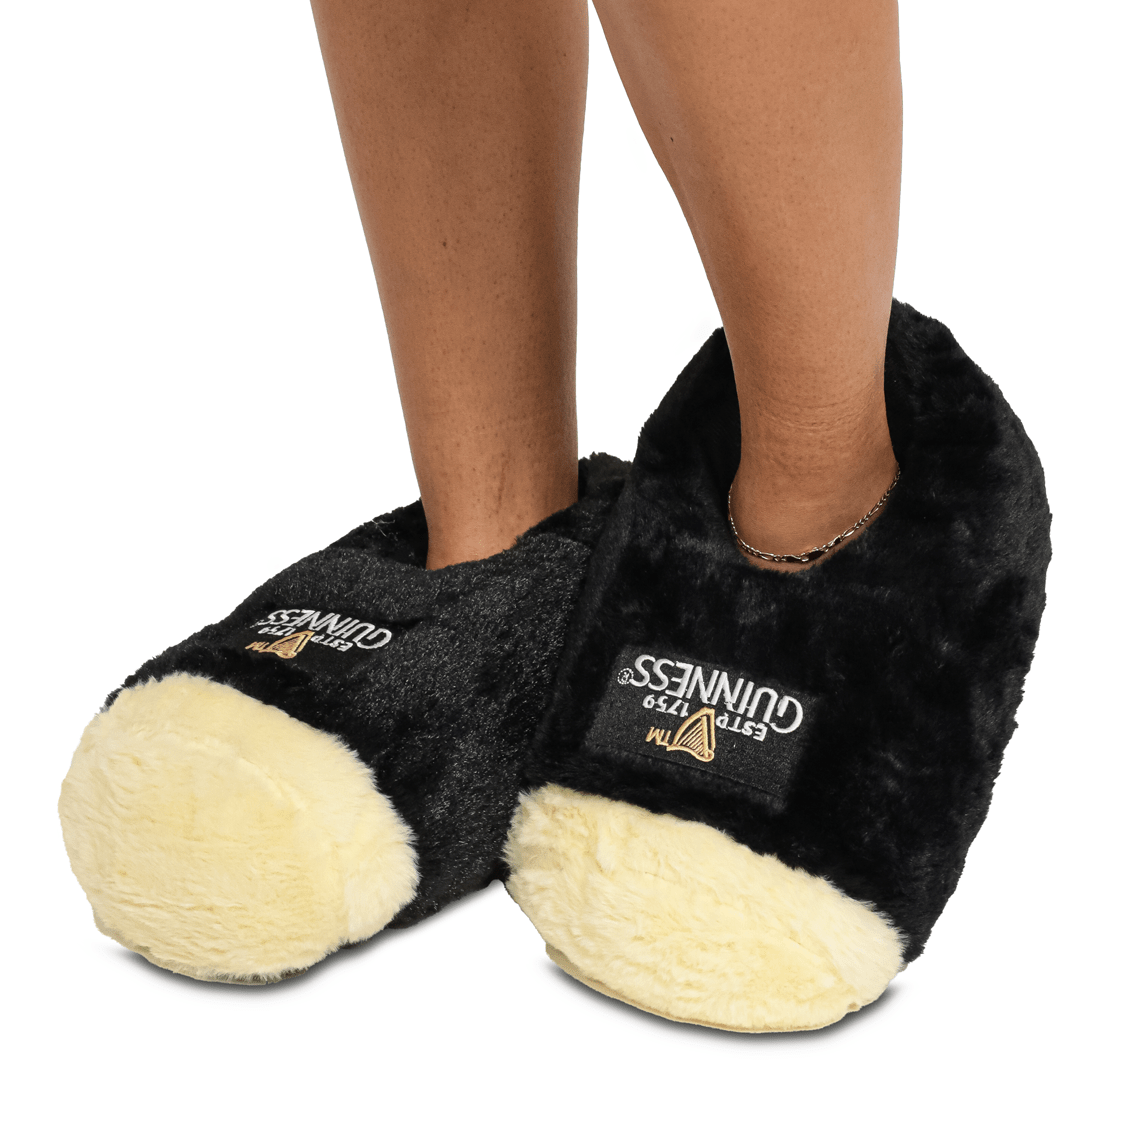 A woman wearing a pair of black and white Guinness® Pint Slippers by Guinness.